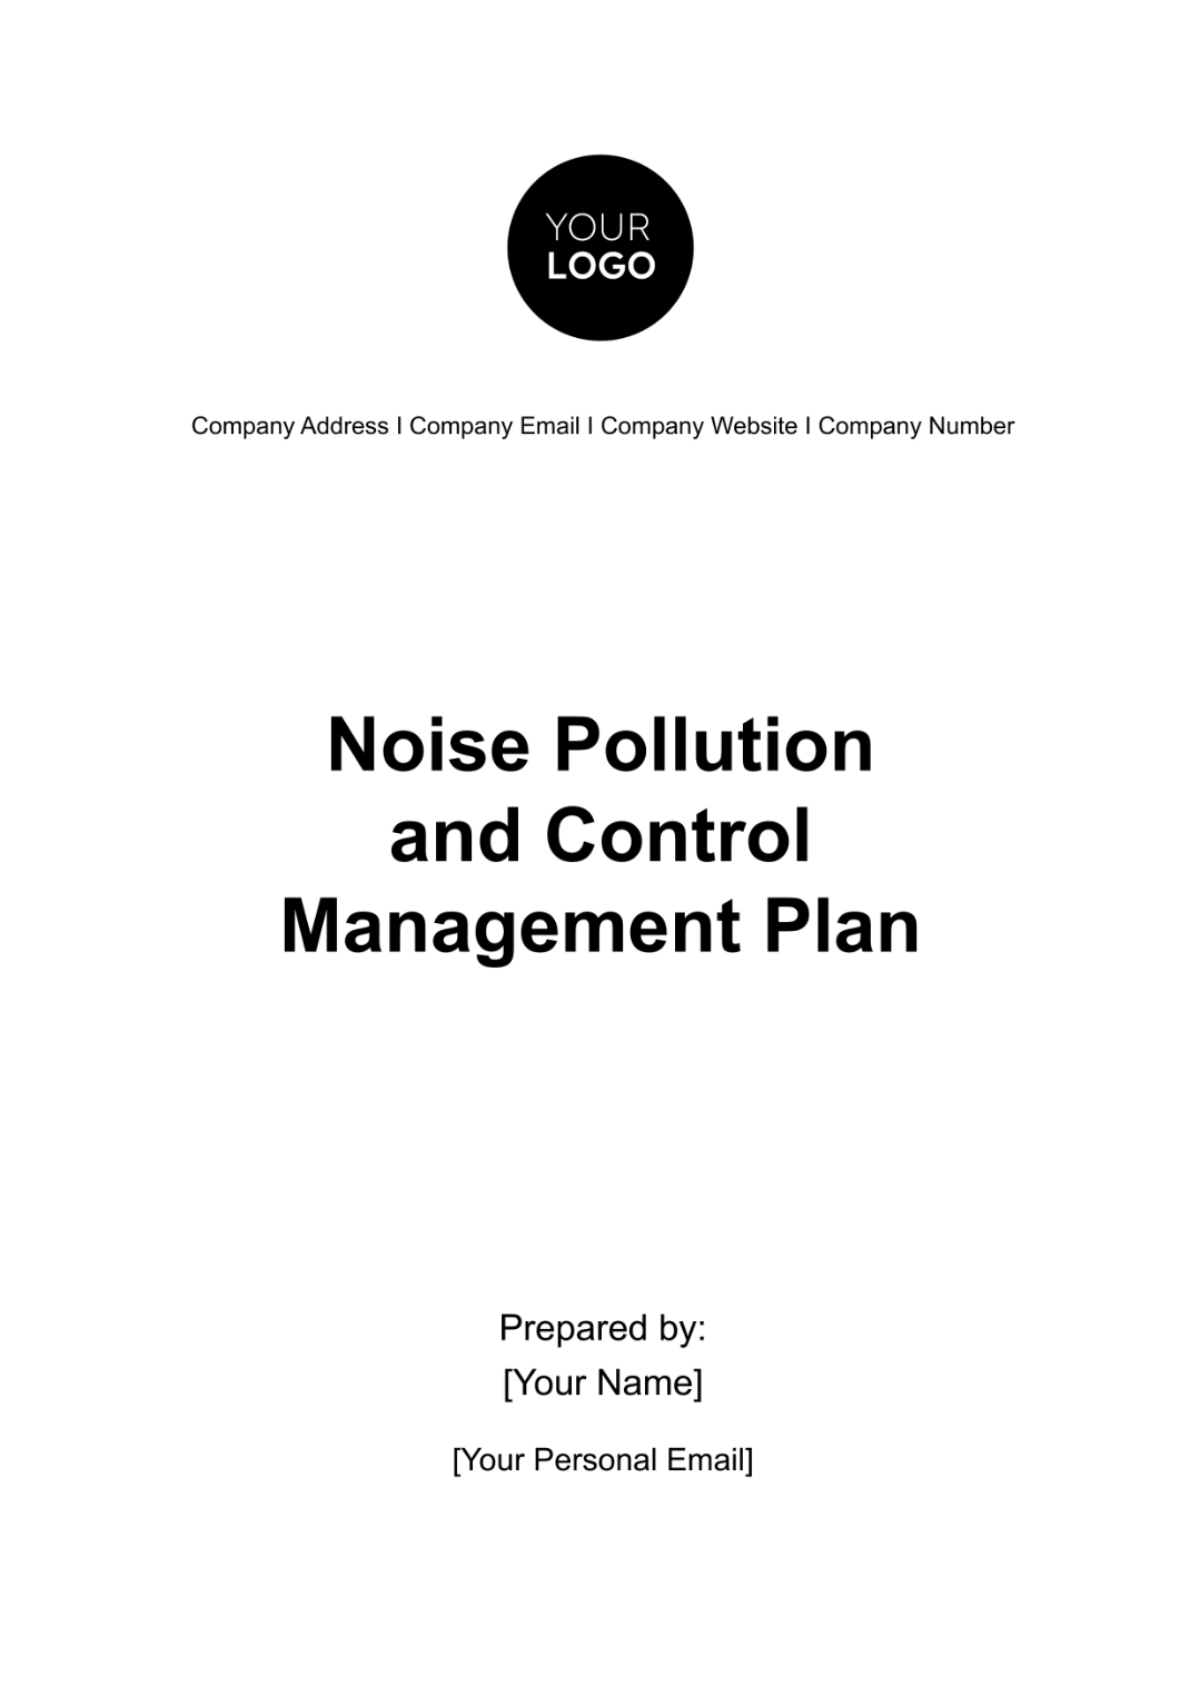 Free Noise Pollution and Control Management Plan HR Template